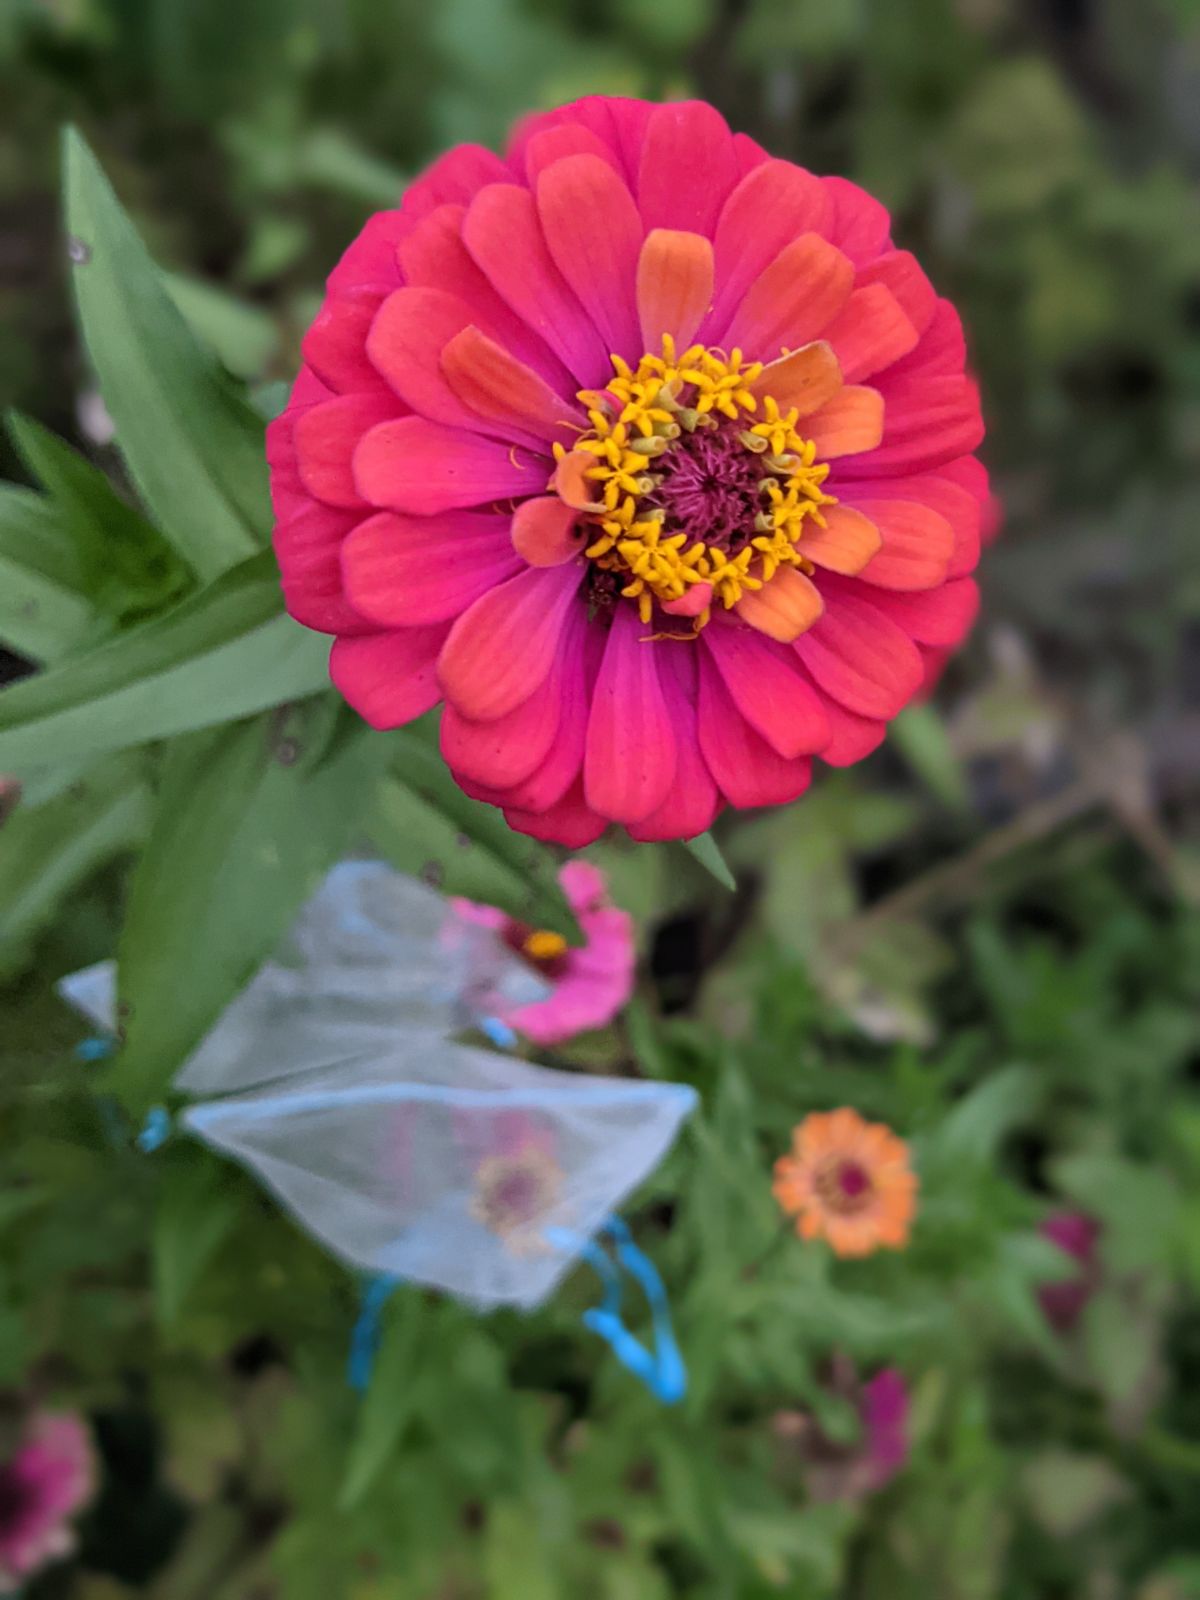 Favorite color changing zinnia in raspberry and orange hues with bagged blooms below